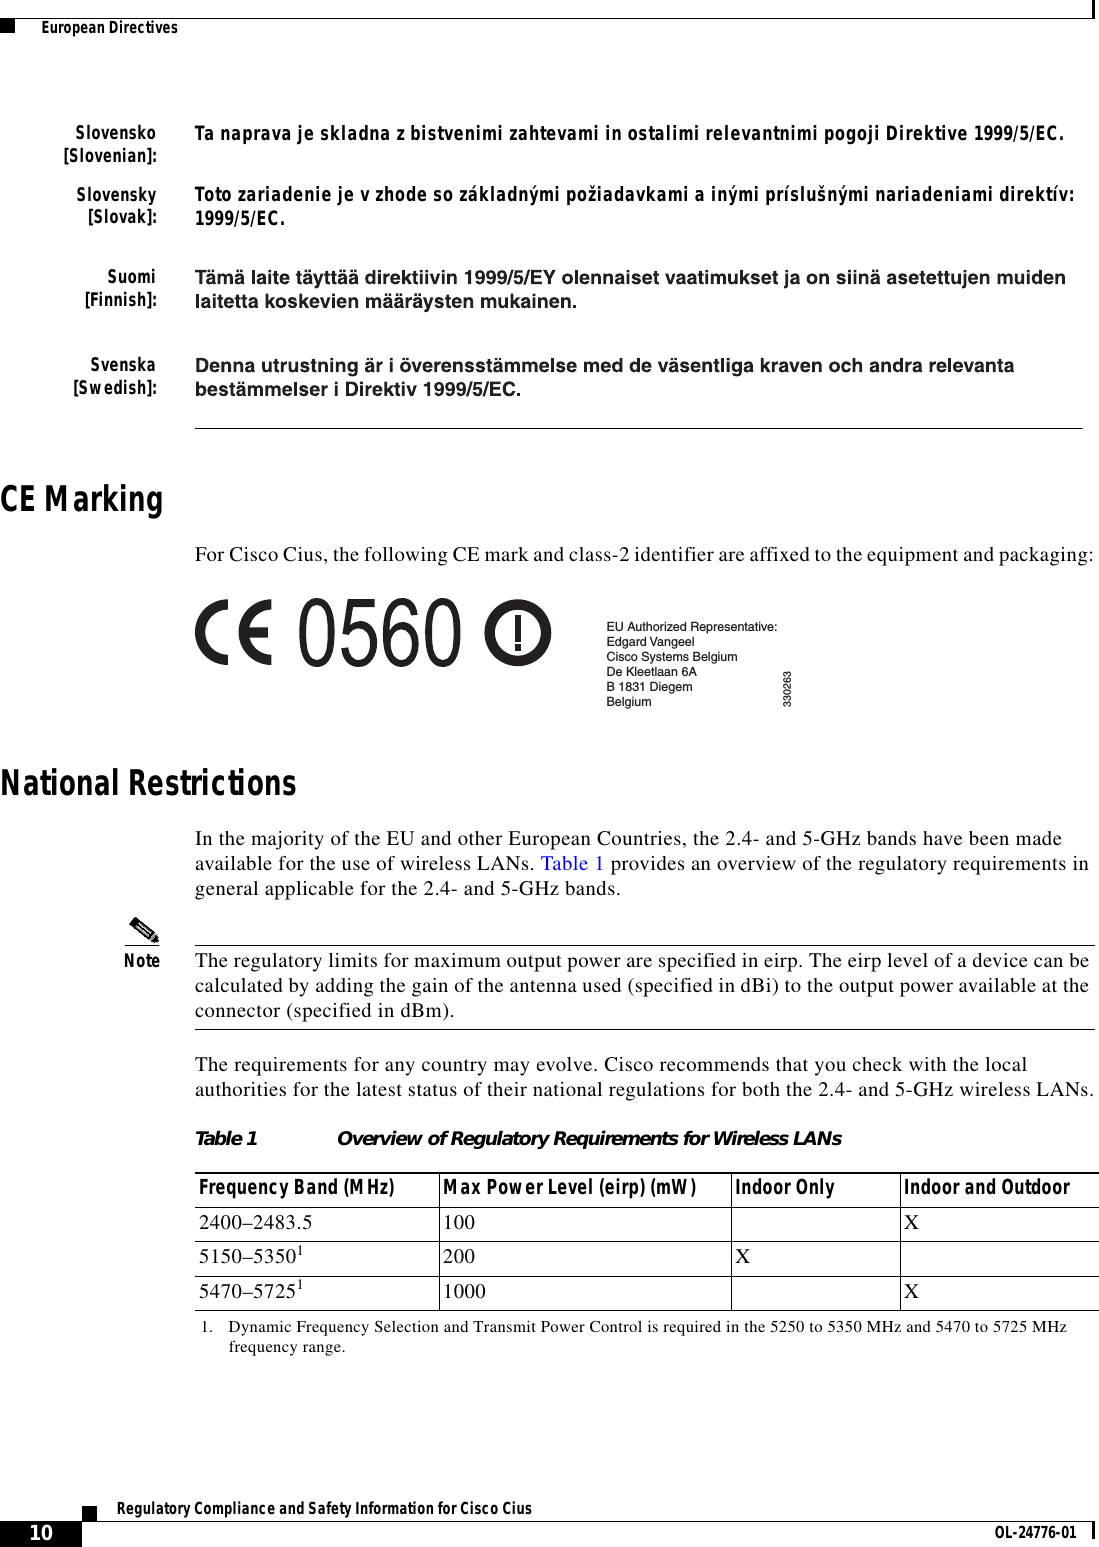  10Regulatory Compliance and Safety Information for Cisco Cius OL-24776-01  European DirectivesCE MarkingFor Cisco Cius, the following CE mark and class-2 identifier are affixed to the equipment and packaging:National RestrictionsIn the majority of the EU and other European Countries, the 2.4- and 5-GHz bands have been made available for the use of wireless LANs. Table 1 provides an overview of the regulatory requirements in general applicable for the 2.4- and 5-GHz bands.Note The regulatory limits for maximum output power are specified in eirp. The eirp level of a device can be calculated by adding the gain of the antenna used (specified in dBi) to the output power available at the connector (specified in dBm).The requirements for any country may evolve. Cisco recommends that you check with the local authorities for the latest status of their national regulations for both the 2.4- and 5-GHz wireless LANs.Slovensko [Slovenian]: Ta naprava je skladna z bistvenimi zahtevami in ostalimi relevantnimi pogoji Direktive 1999/5/EC.Slovensky [Slovak]: Toto zariadenie je v zhode so základnými požiadavkami a inými príslušnými nariadeniami direktív: 1999/5/EC. Suomi [Finnish]: Svenska [Swedish]: 330263EU Authorized Representative:Edgard VangeelCisco Systems BelgiumDe Kleetlaan 6AB 1831 DiegemBelgiumTable 1 Overview of Regulatory Requirements for Wireless LANs Frequency Band (MHz) Max Power Level (eirp) (mW) Indoor Only Indoor and Outdoor2400–2483.5 100 X5150–535011. Dynamic Frequency Selection and Transmit Power Control is required in the 5250 to 5350 MHz and 5470 to 5725 MHz frequency range.200 X5470–572511000 X